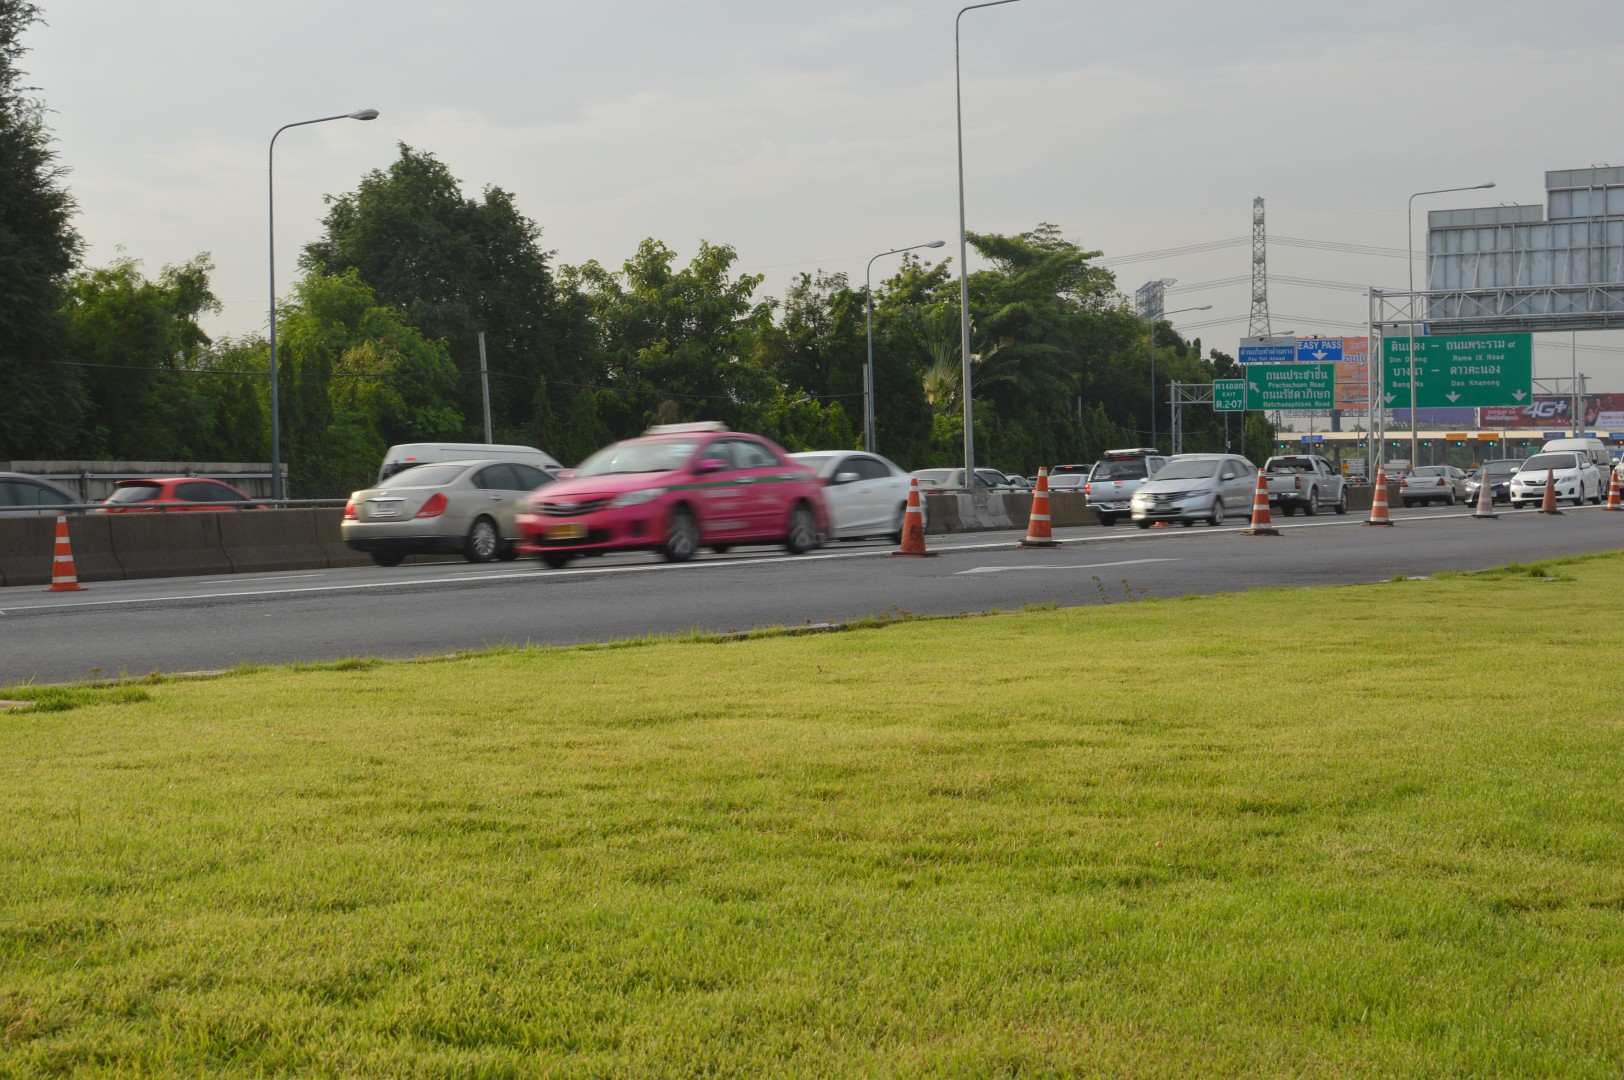 highway verge in Bangkok sodded with manilagrass